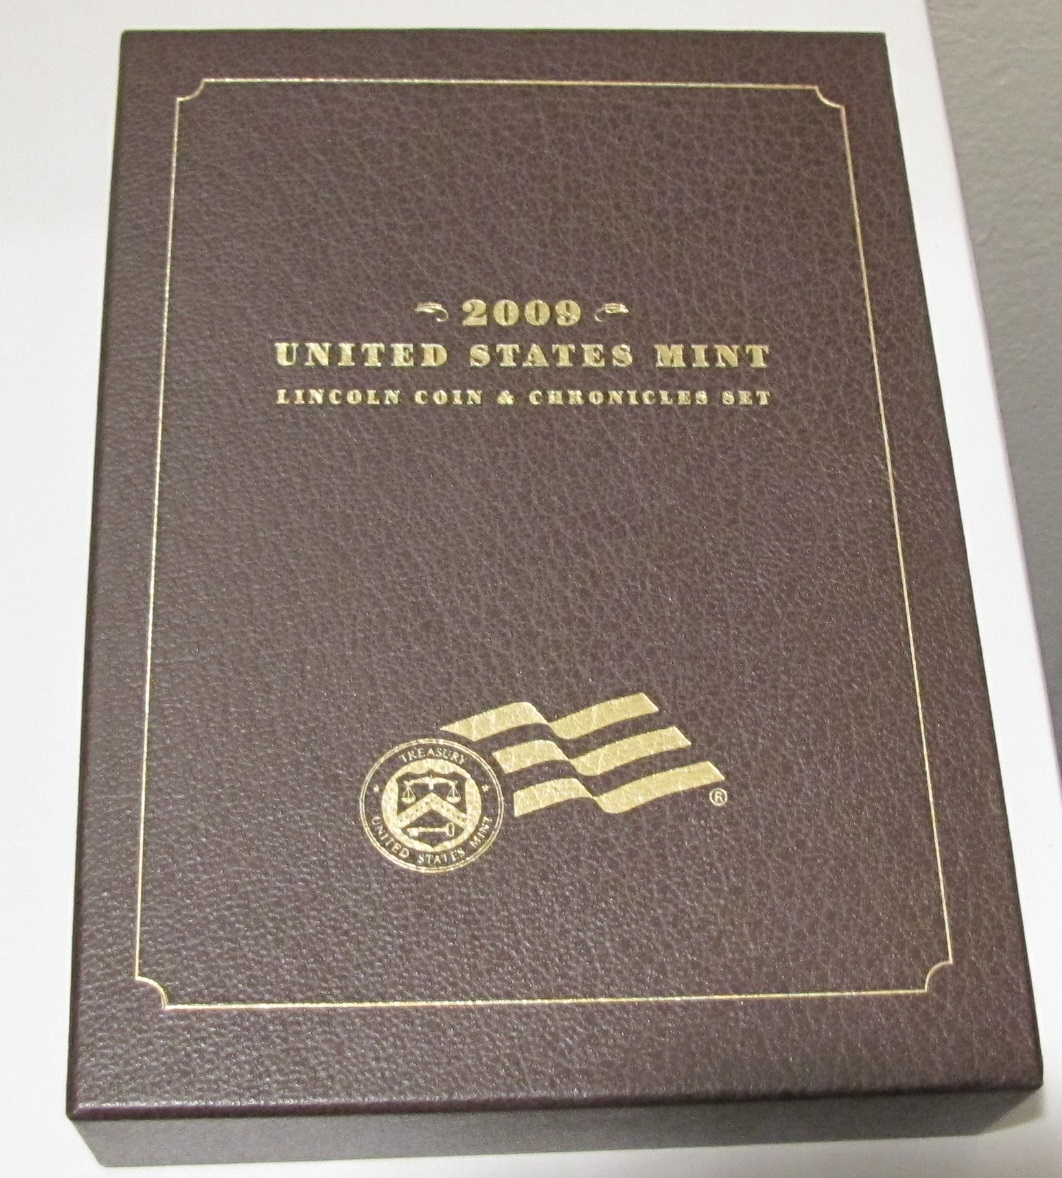 United States Mint Lincoln Coin and Chronicles Set (LN6) 001a.JPG